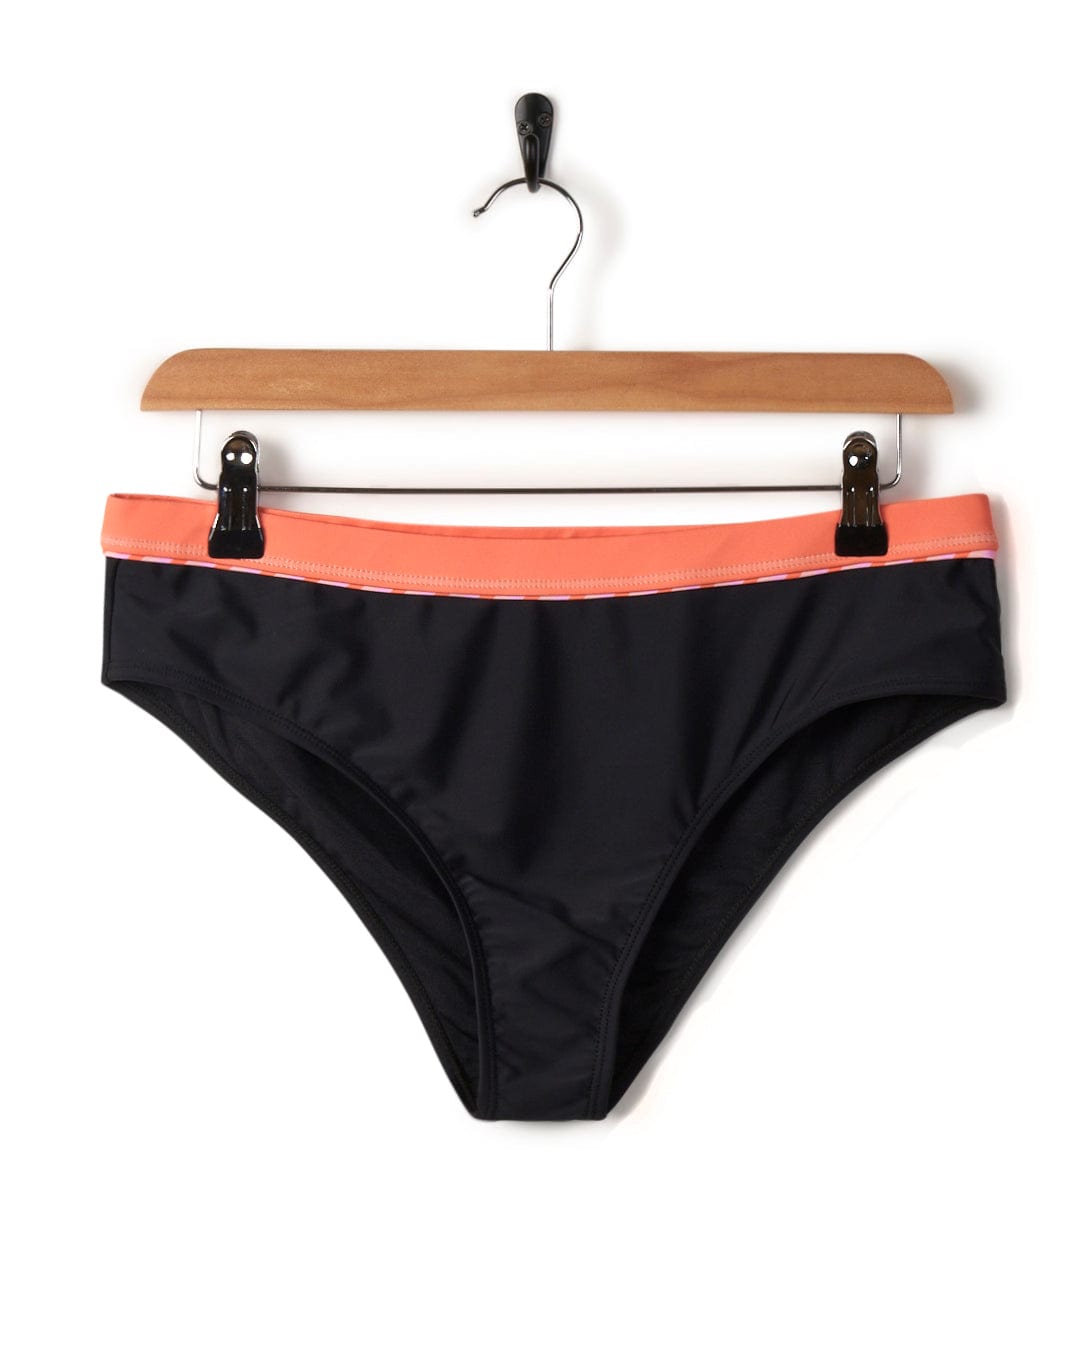 Caeley - Recycled Womens Retro Bikini Bottoms in Black by Saltrock, with an orange waistband, hanging on a wooden hanger against a white background.